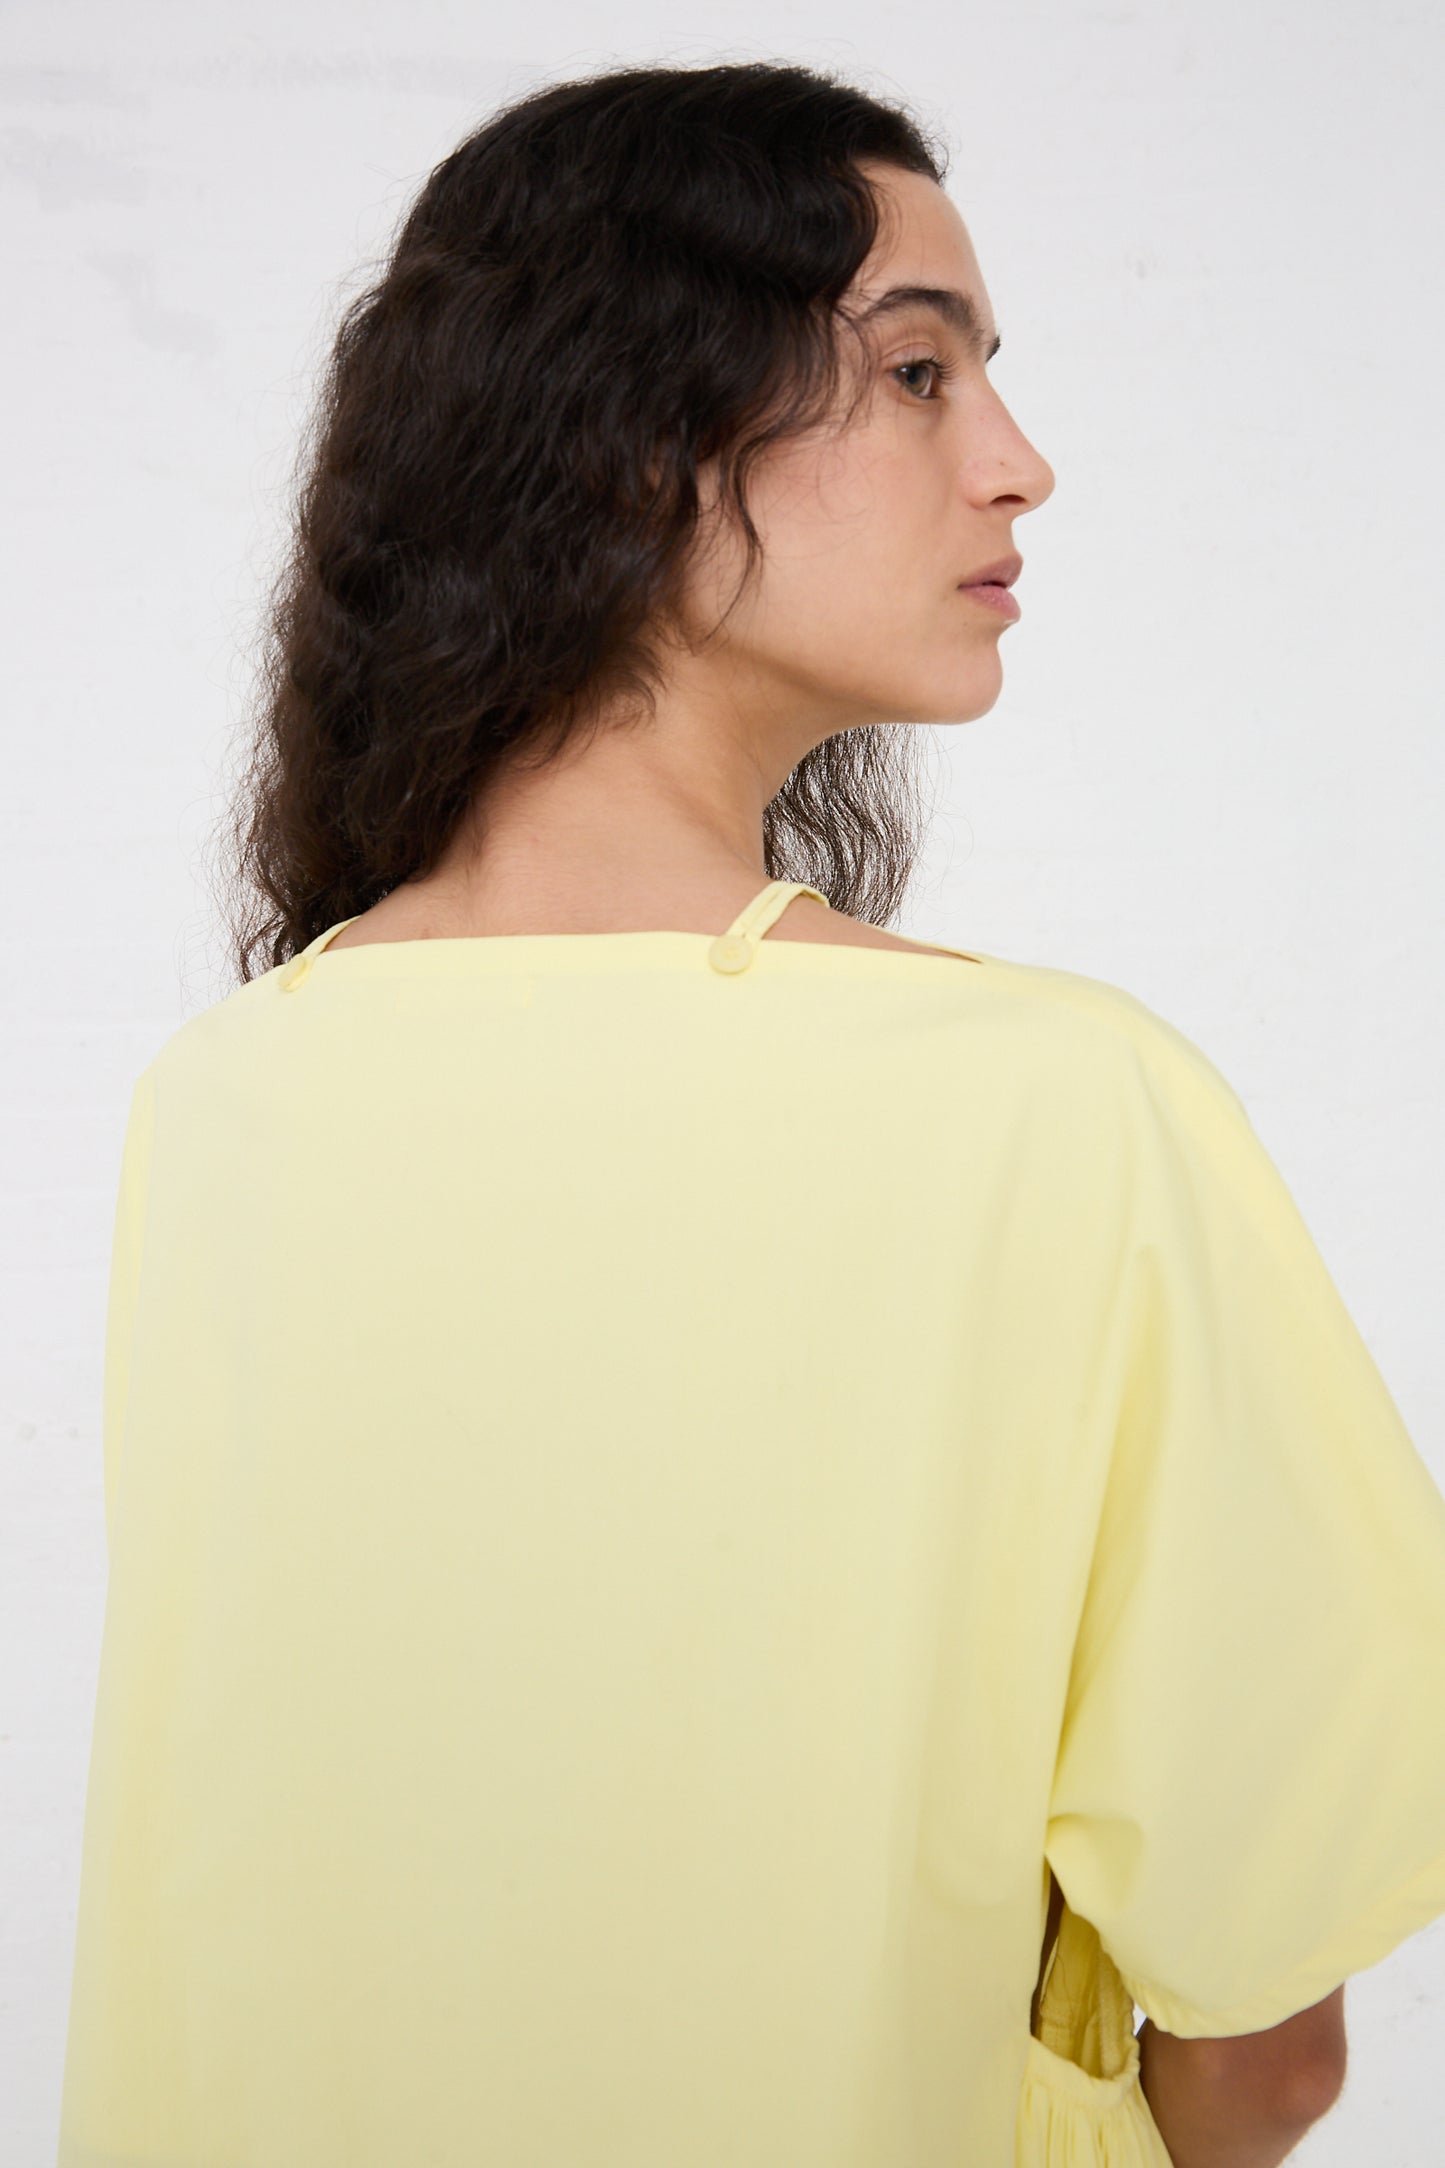 A side profile of a person with shoulder-length curly hair, wearing a Black Crane Organic Cotton Star Neck Dress in Lemon, featuring a buttoned back detail.